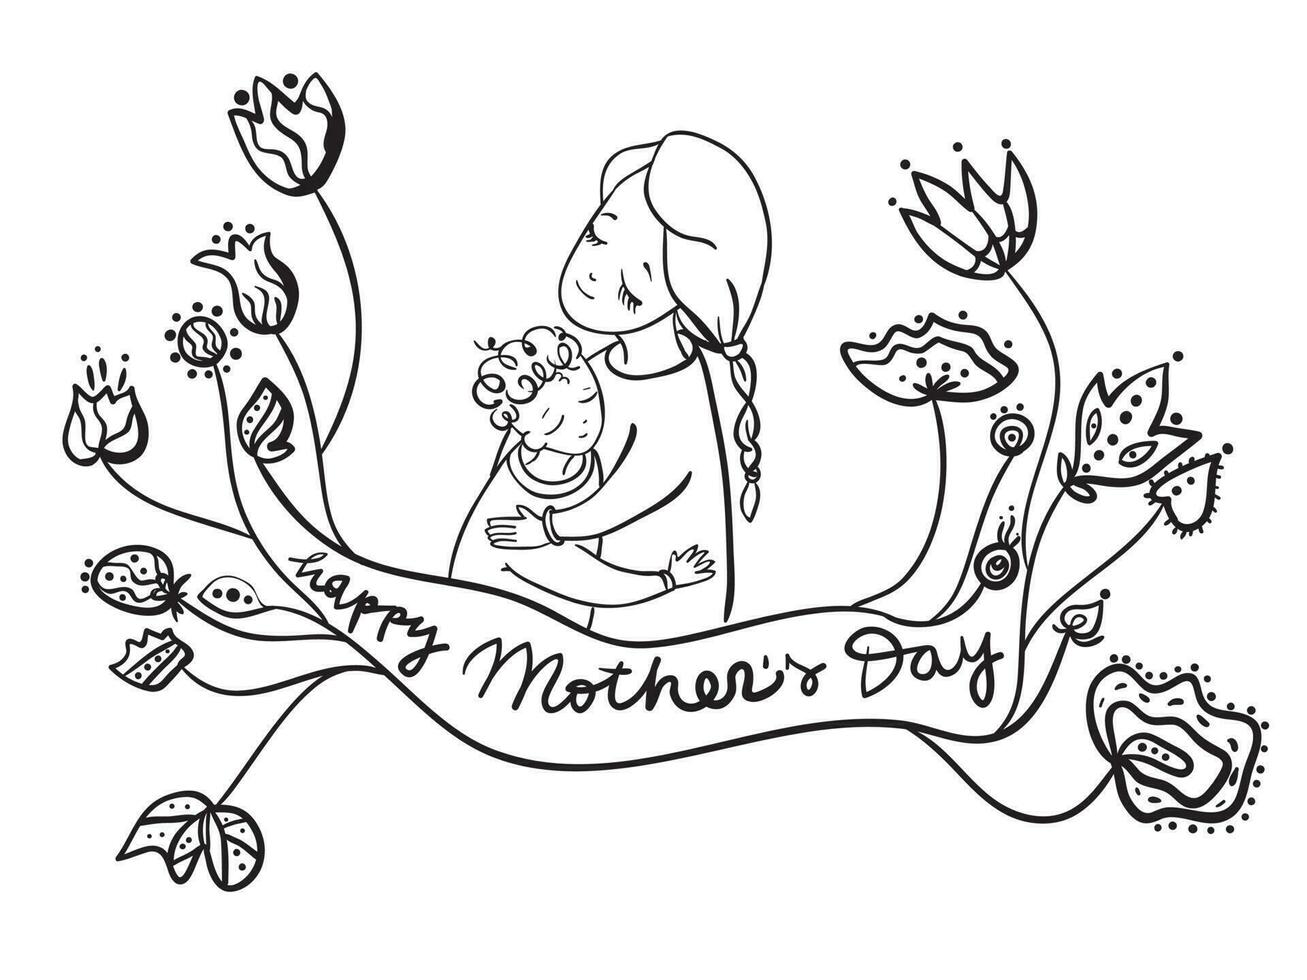 Mother's day greeting card. Illustration with mom and child. Calligraphy phrase Happy Mother's Day. Black and white, linear drawing vector